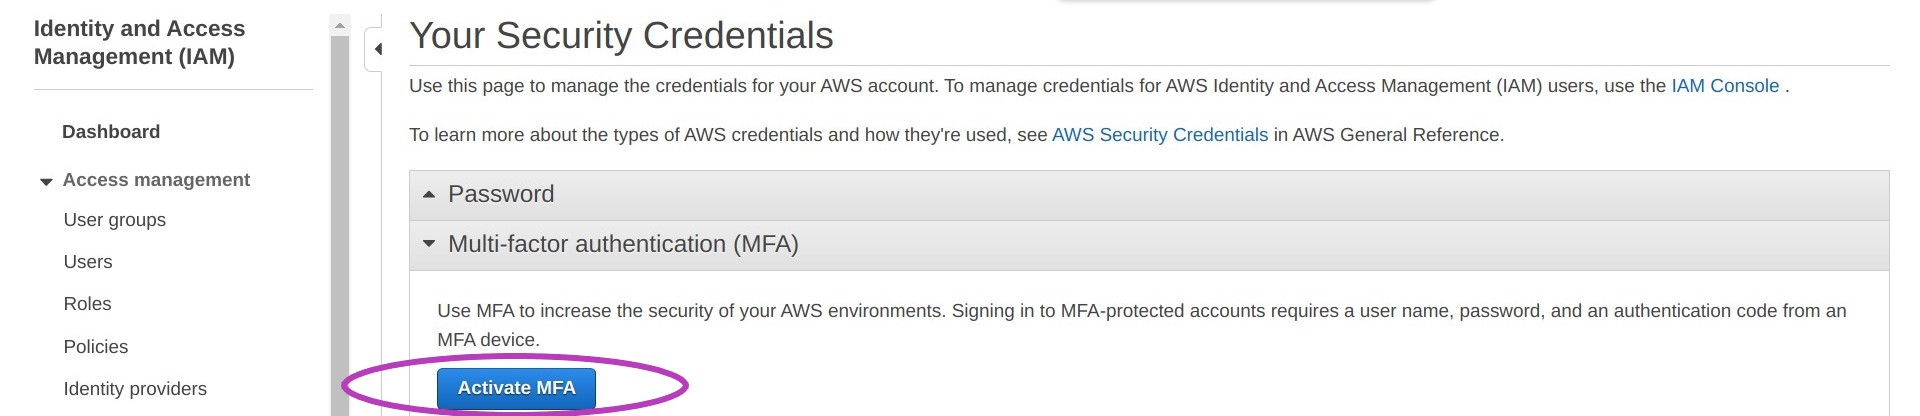 Screen shot of AWS Console Your Security Credentials page in a browser with the option Activate MFA circled